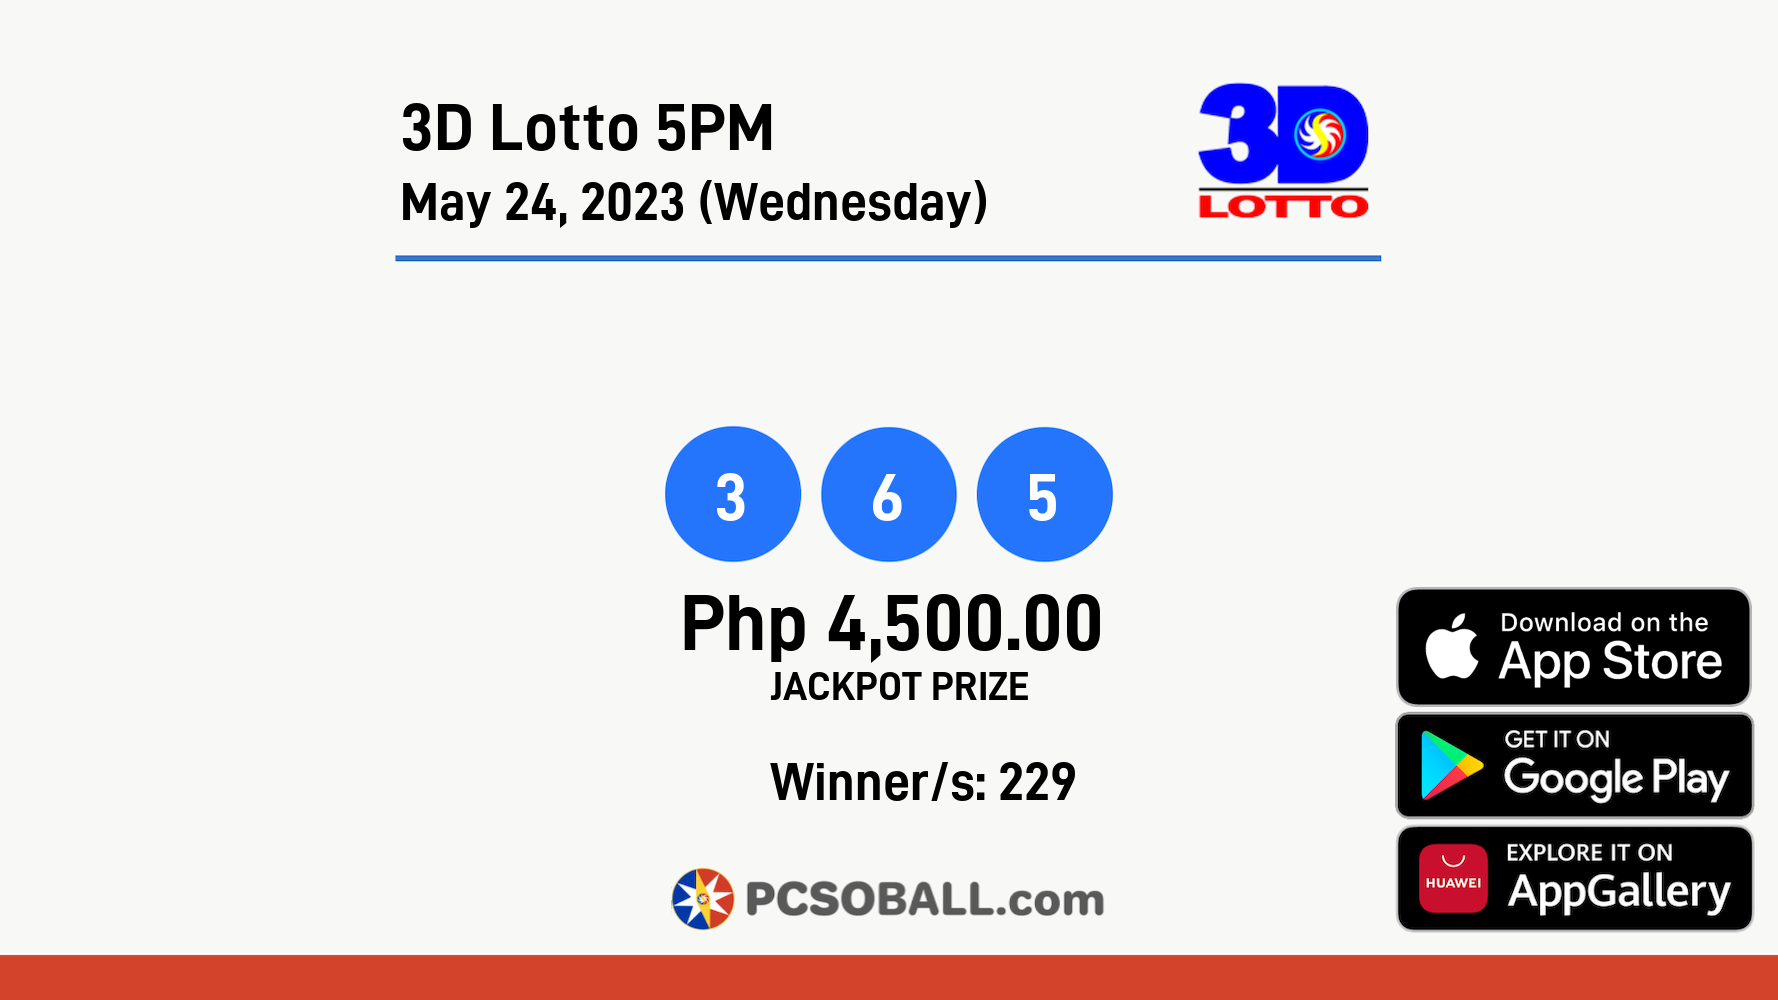 3D Lotto 5PM May 24, 2023 (Wednesday) Result